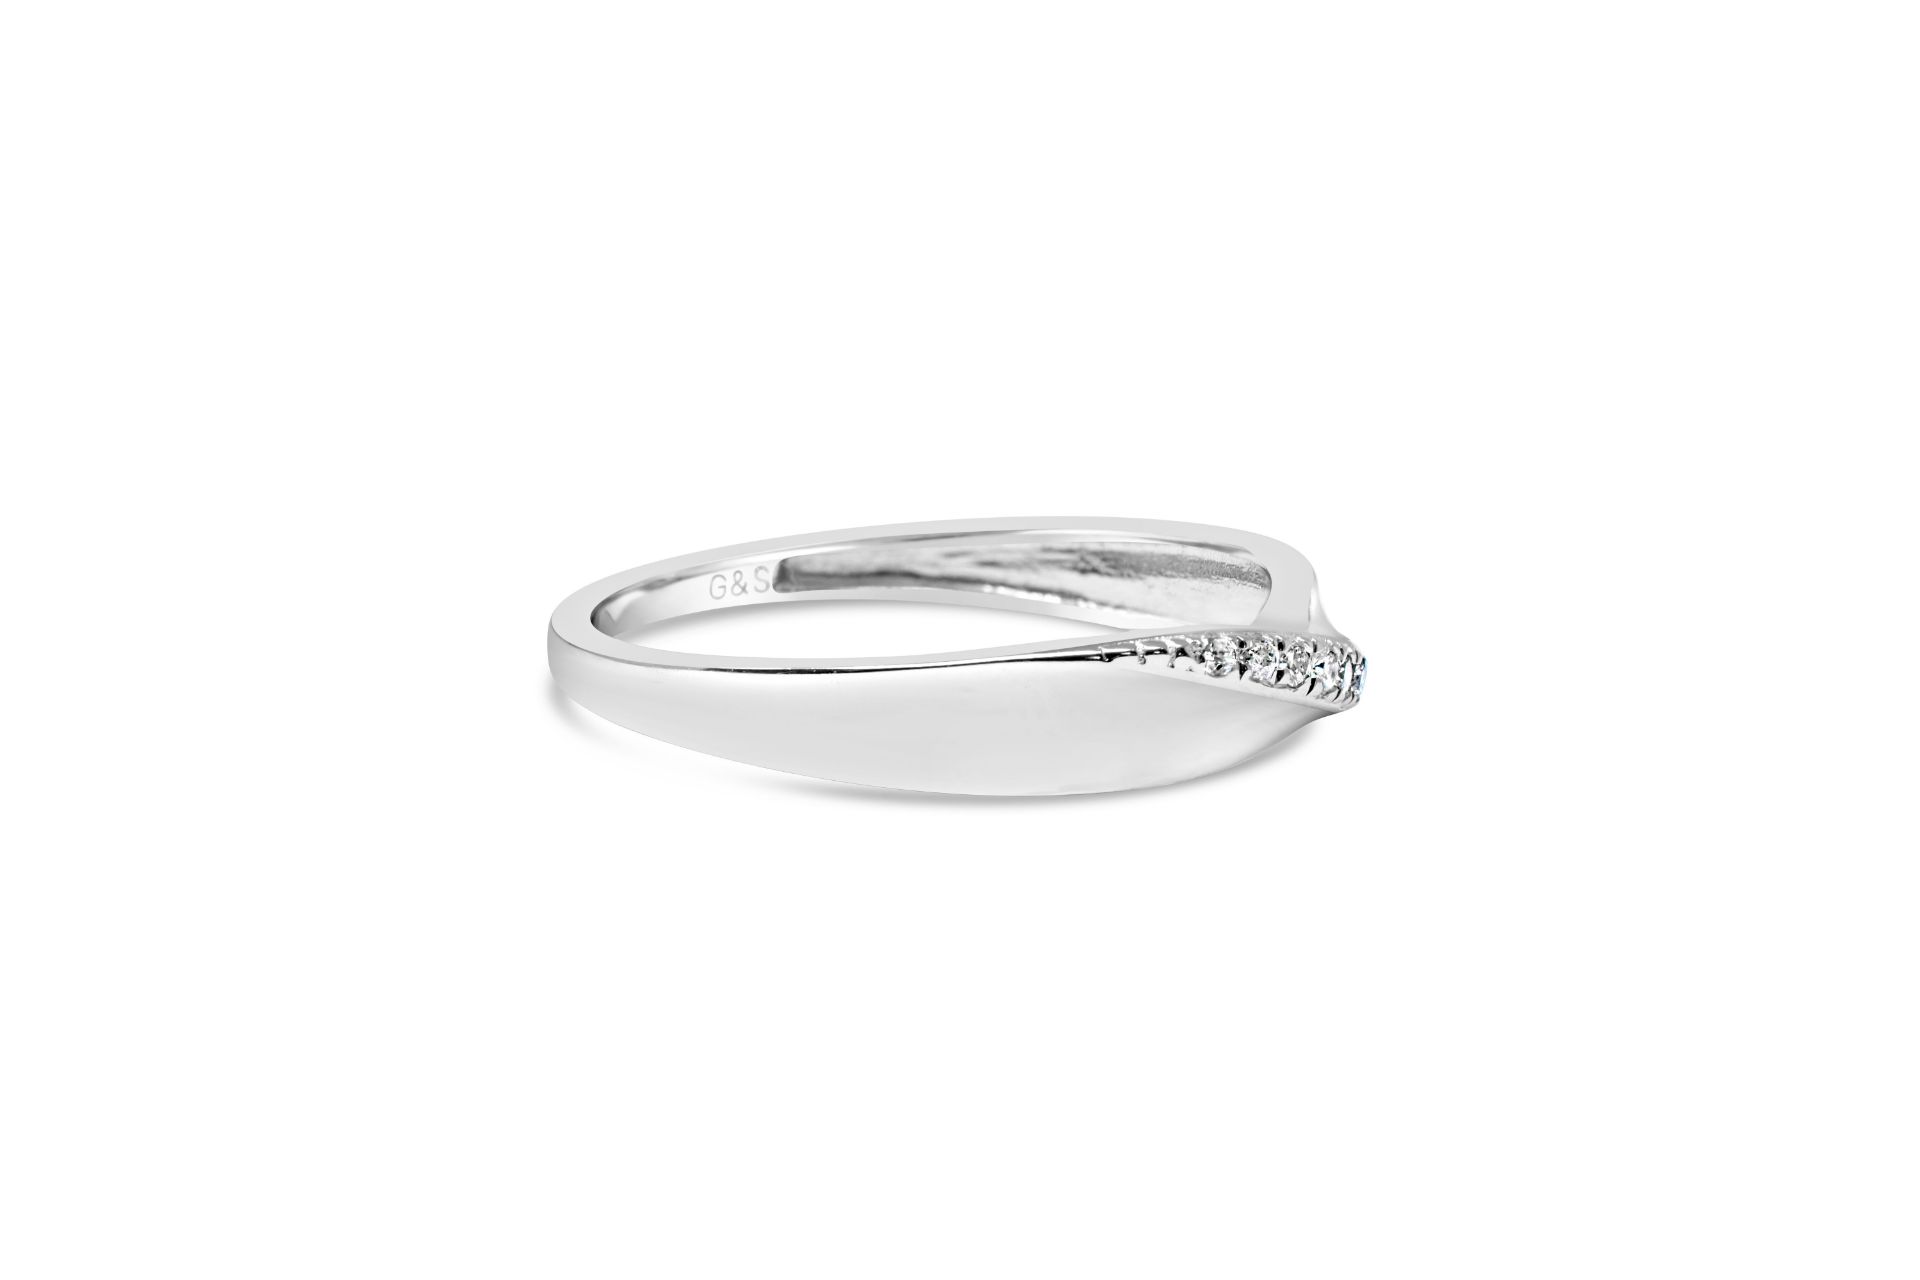 9CT White Gold Diamond Band with Twist, Size N, Me - Image 3 of 4